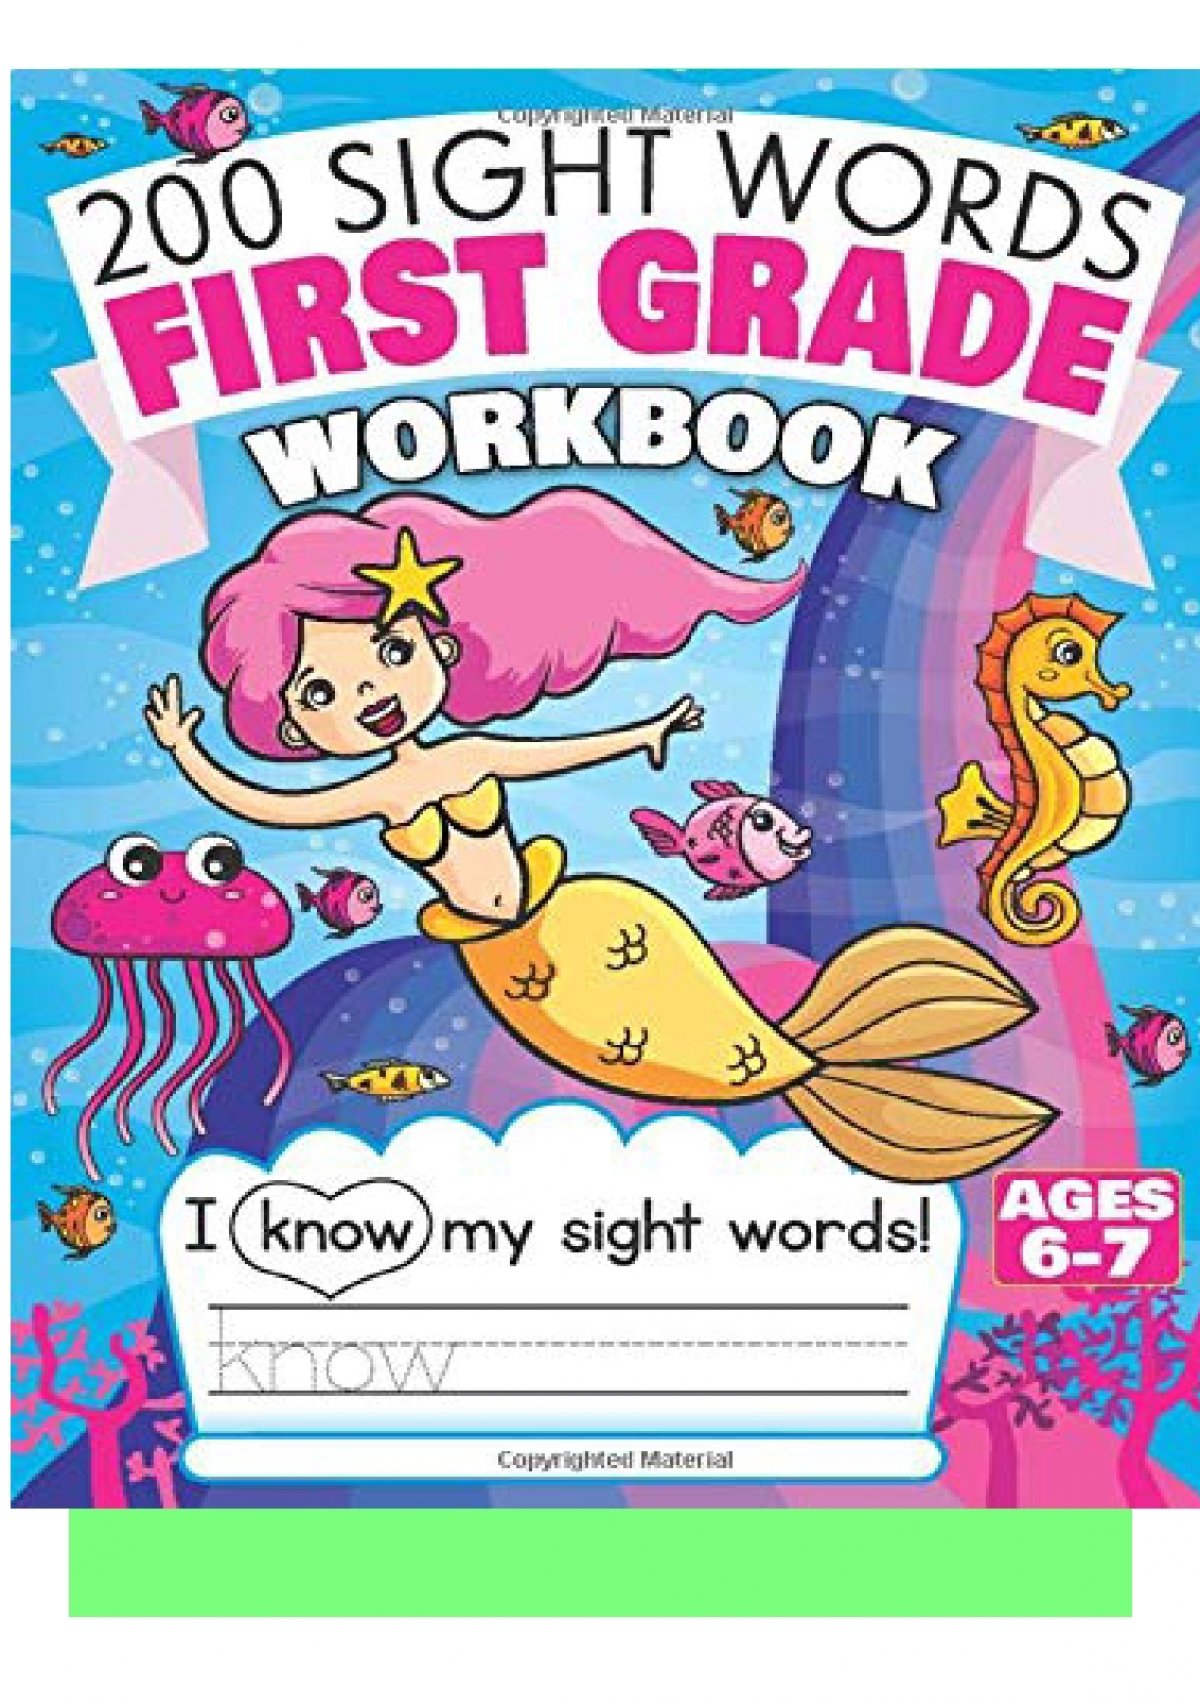 pdf-200-sight-words-first-grade-workbook-ages-6-7-135-fun-pages-of-reading-writing